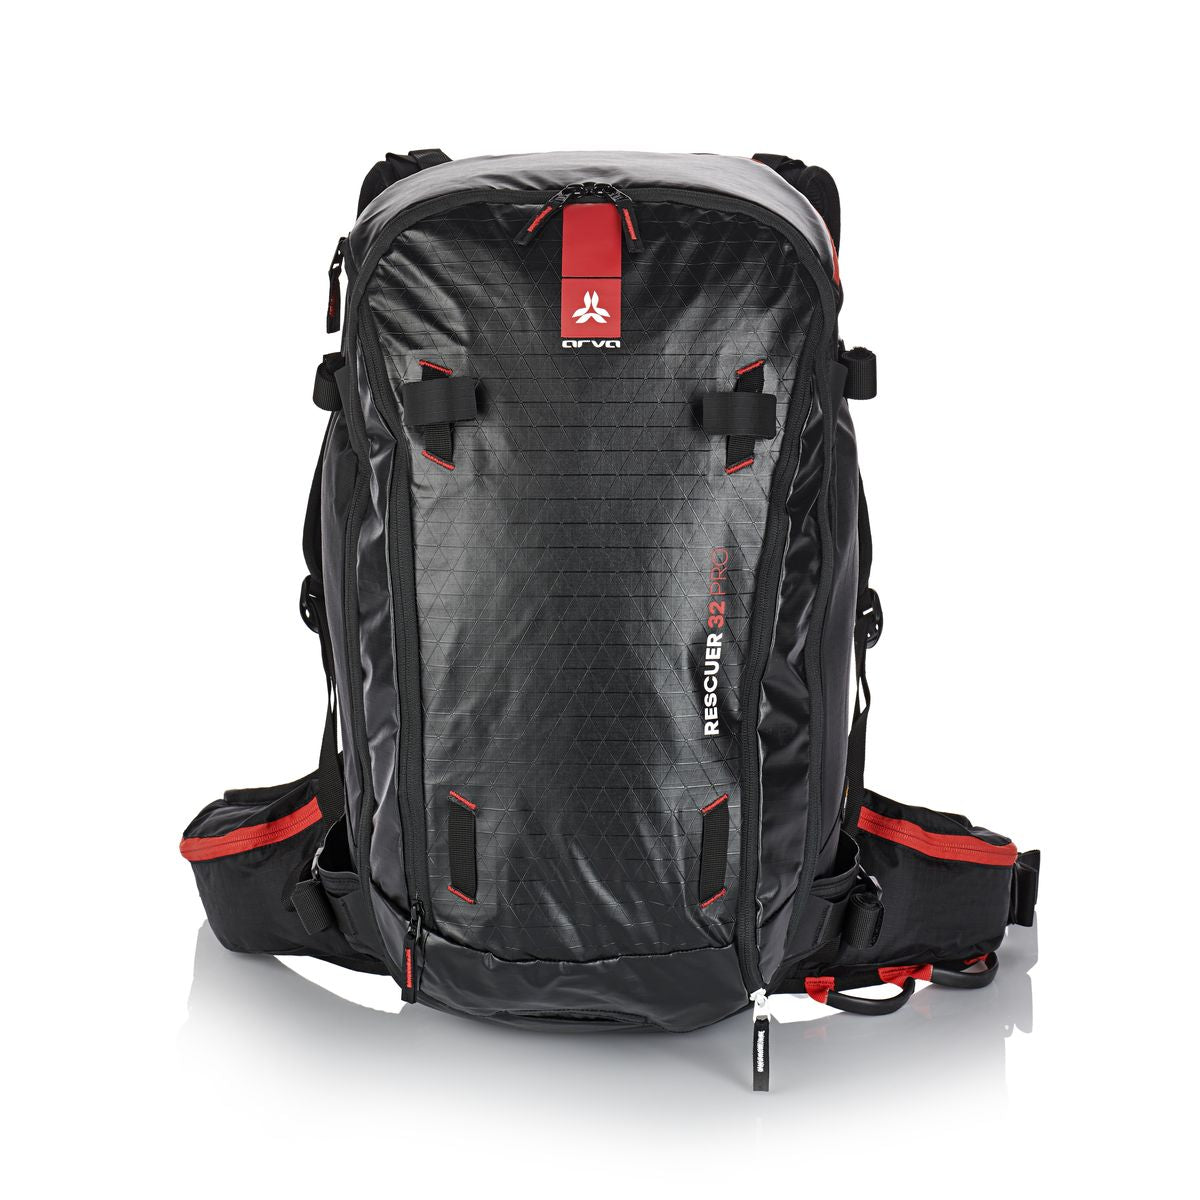 backpack rescuer pro 32 l